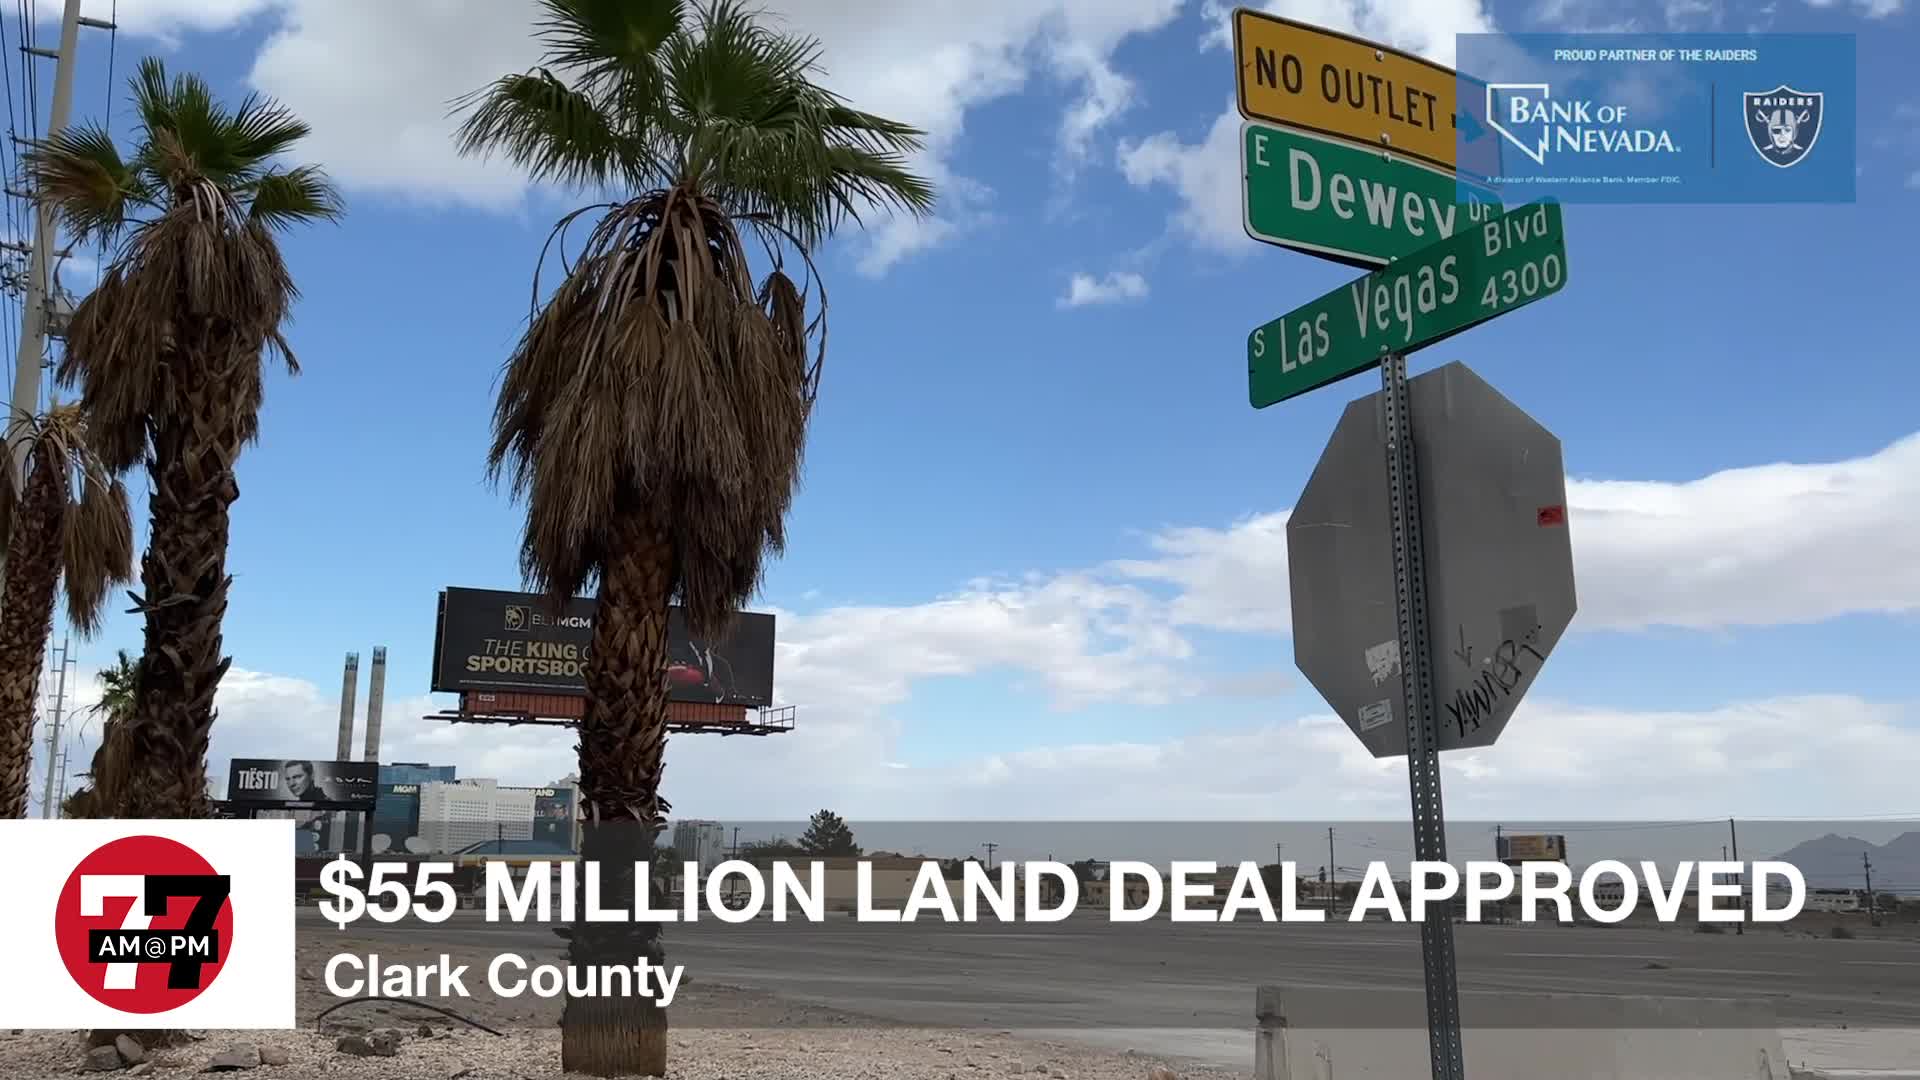 7@7PM $55M Land Deal Approved